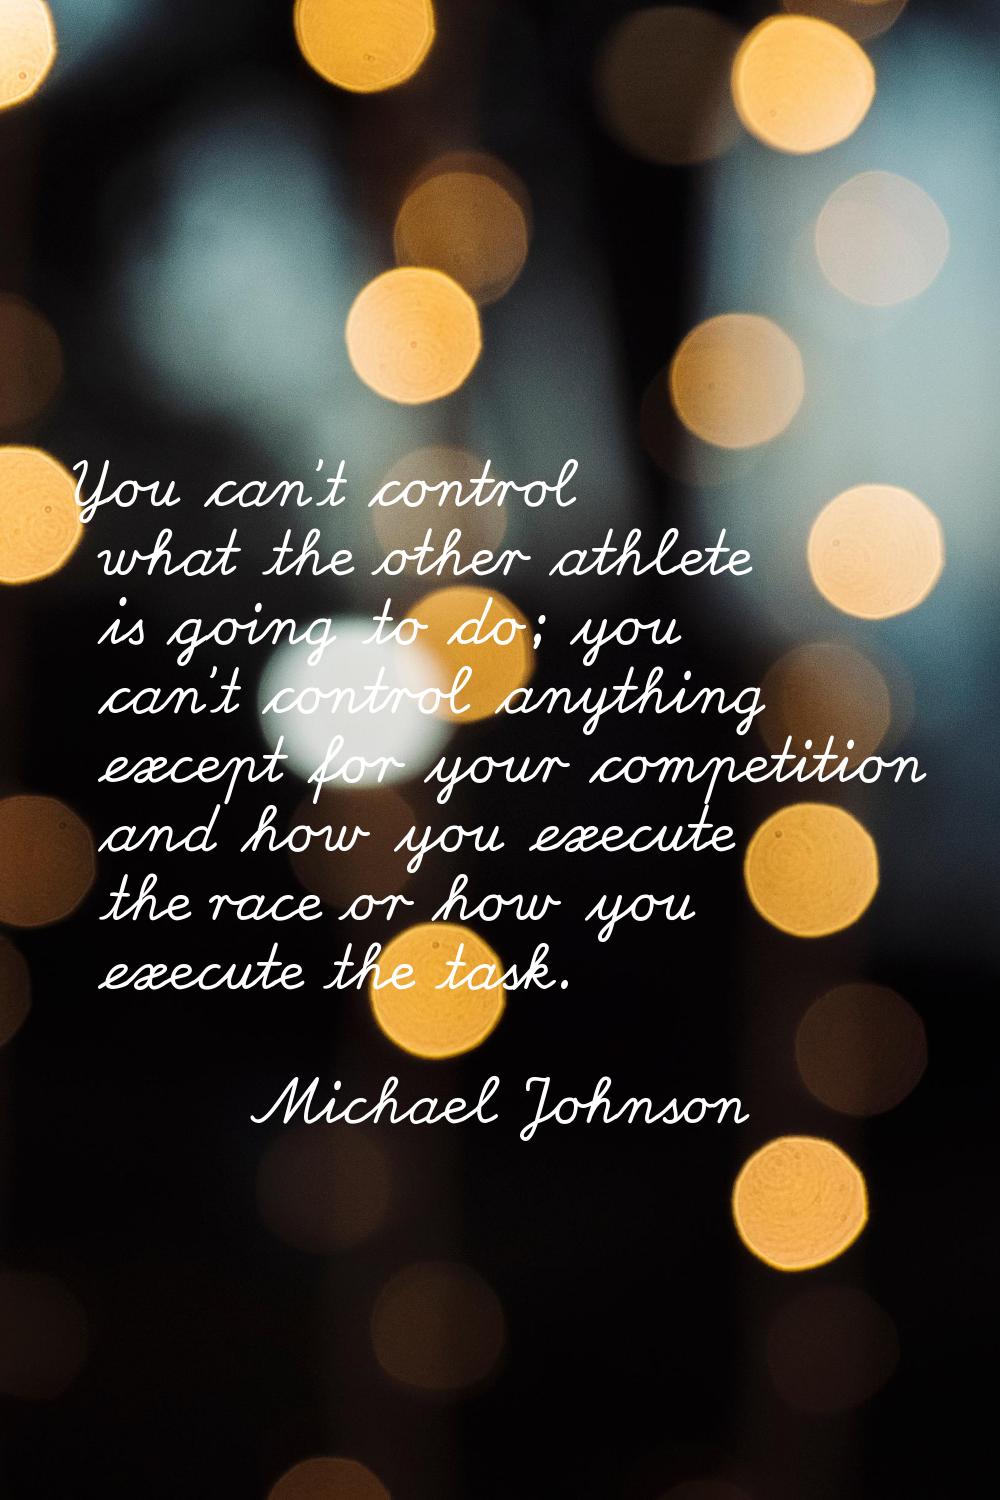 You can't control what the other athlete is going to do; you can't control anything except for your